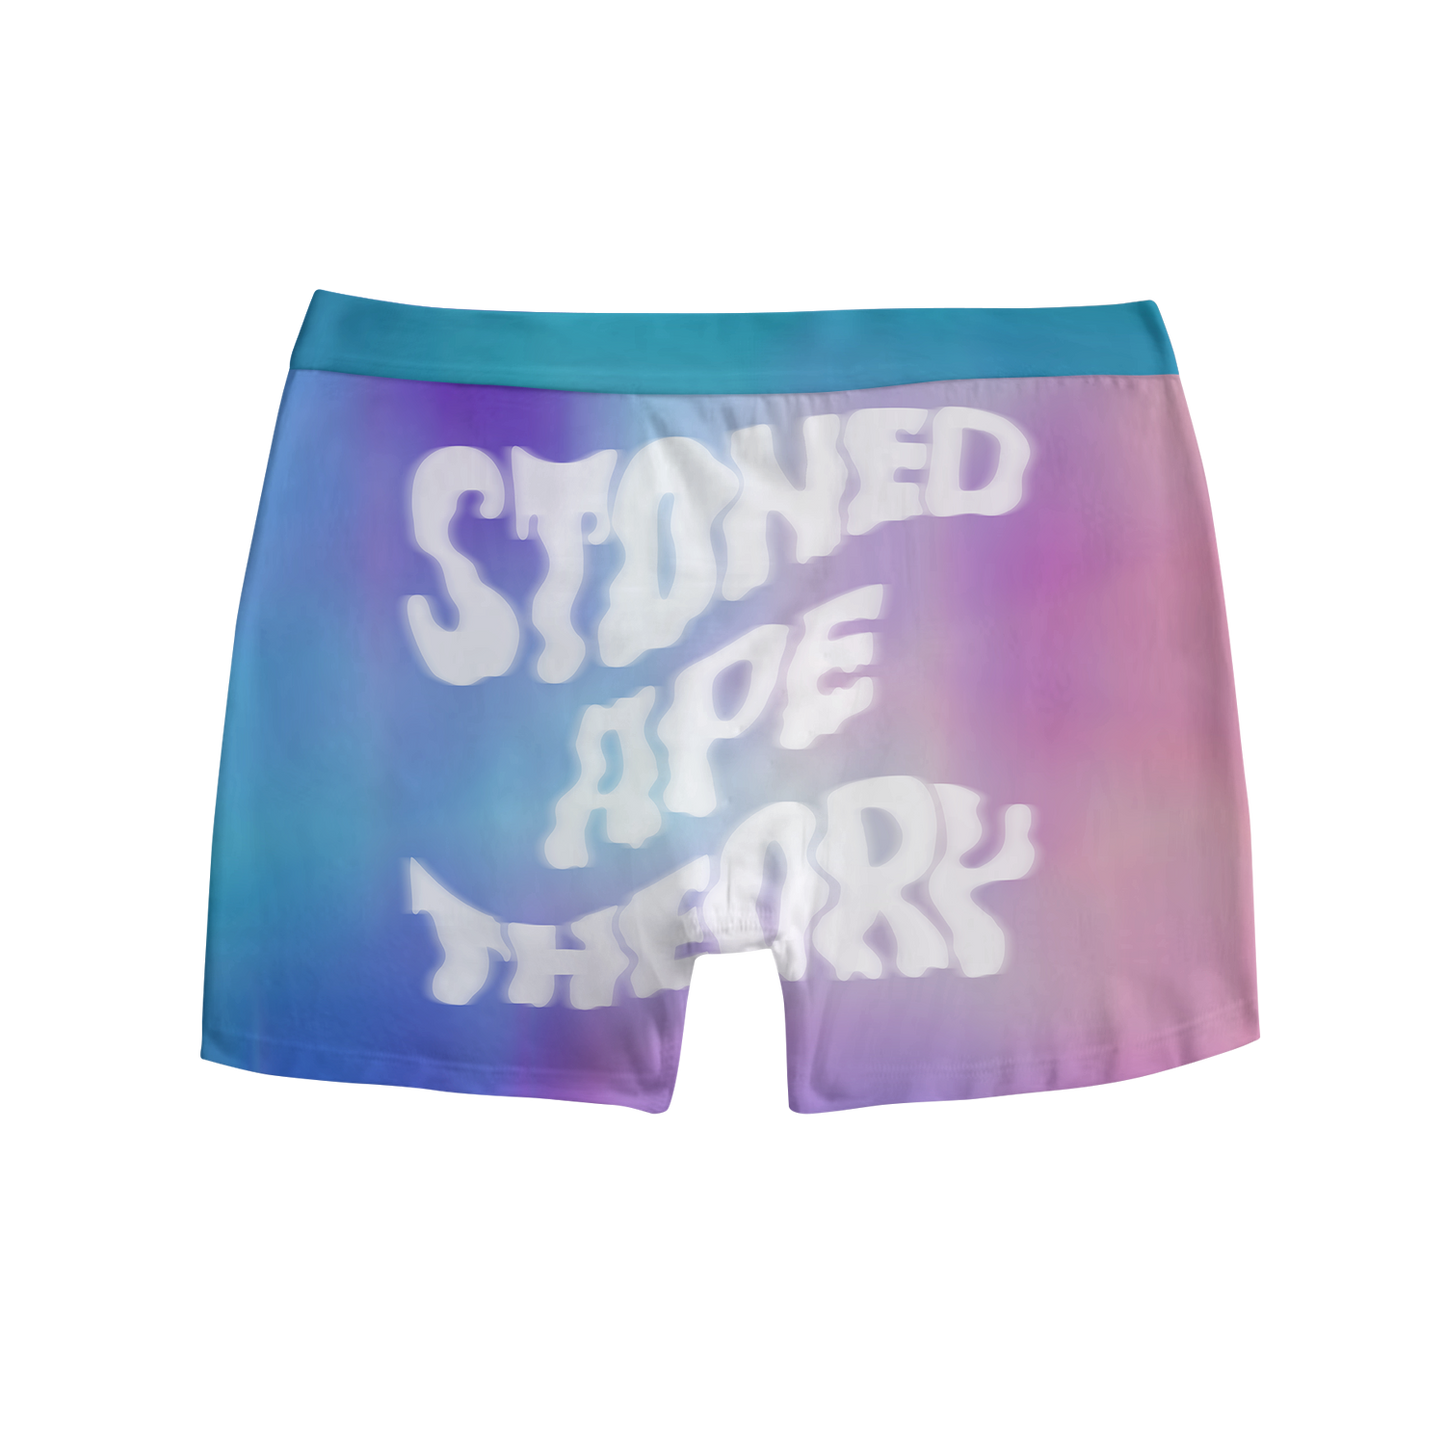 Neon Glowing Monkey All Over Print Men's Boxer Brief